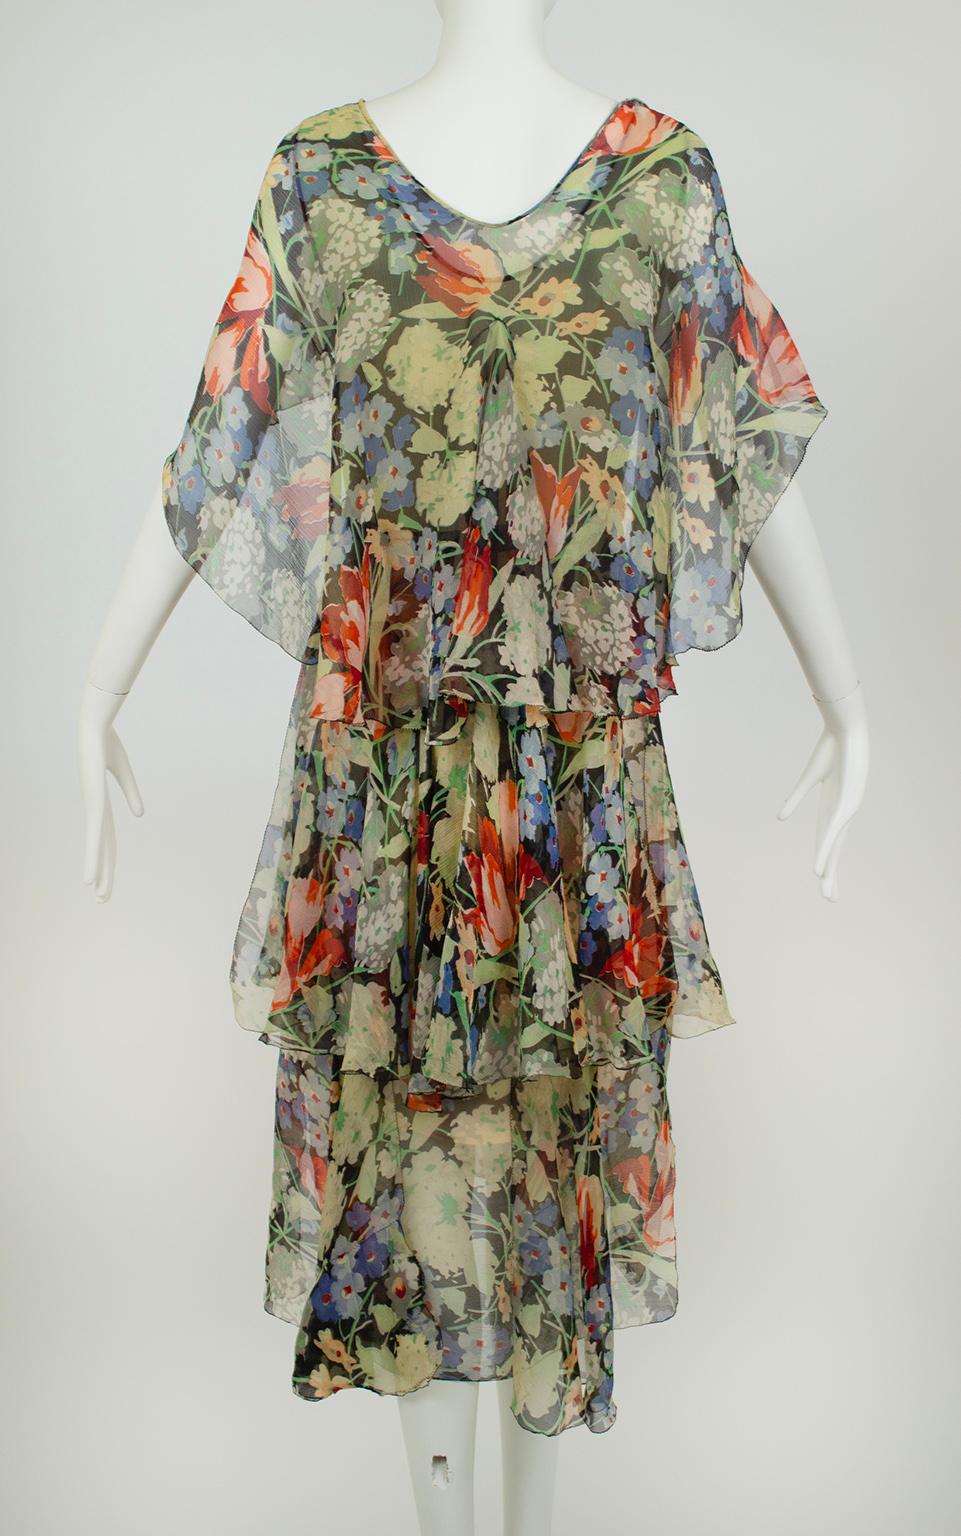 Green Floral Chiffon Sleeveless Handkerchief Dress w Flutter Capelet – XS, 1920s In Good Condition For Sale In Tucson, AZ